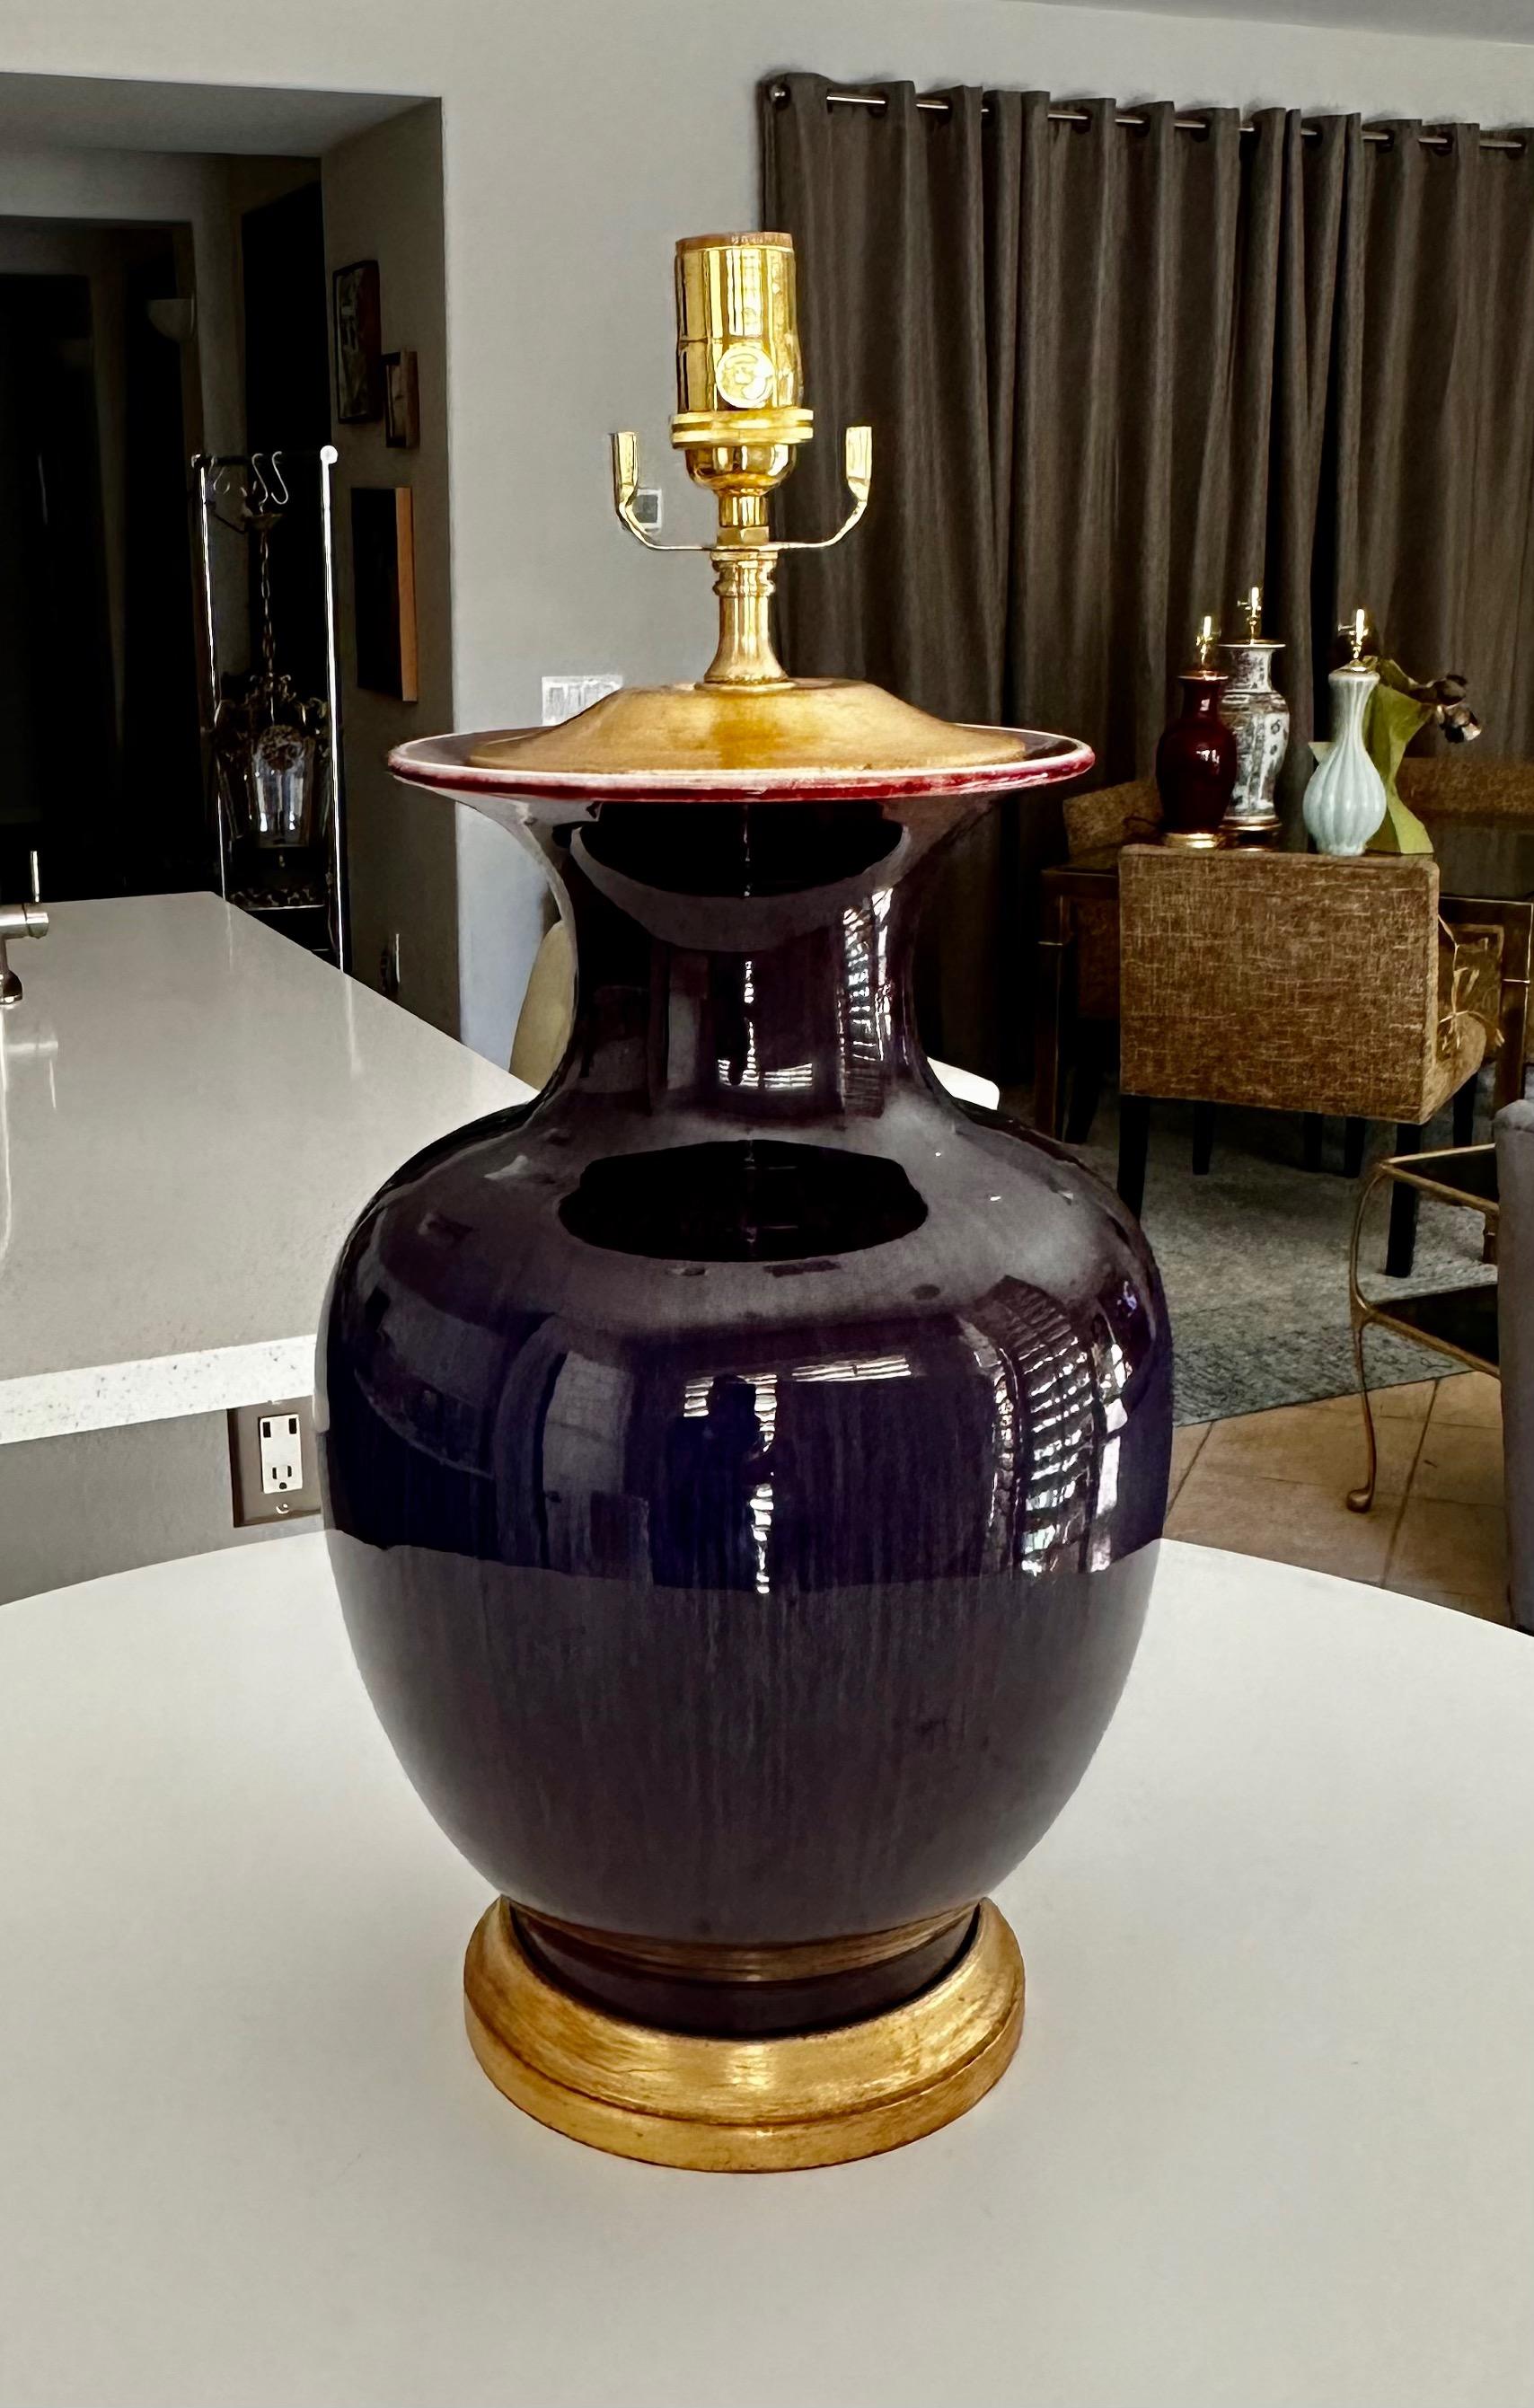 Single Chinese Asian Sang de Boeuf oxblood porcelain vase mounted on gilt turned wood lamp base. The coloring has an overall purplish tint with hints or red and vertical striping. Rewired with new 3 way brass socket and rayon covered cord.
Measures: